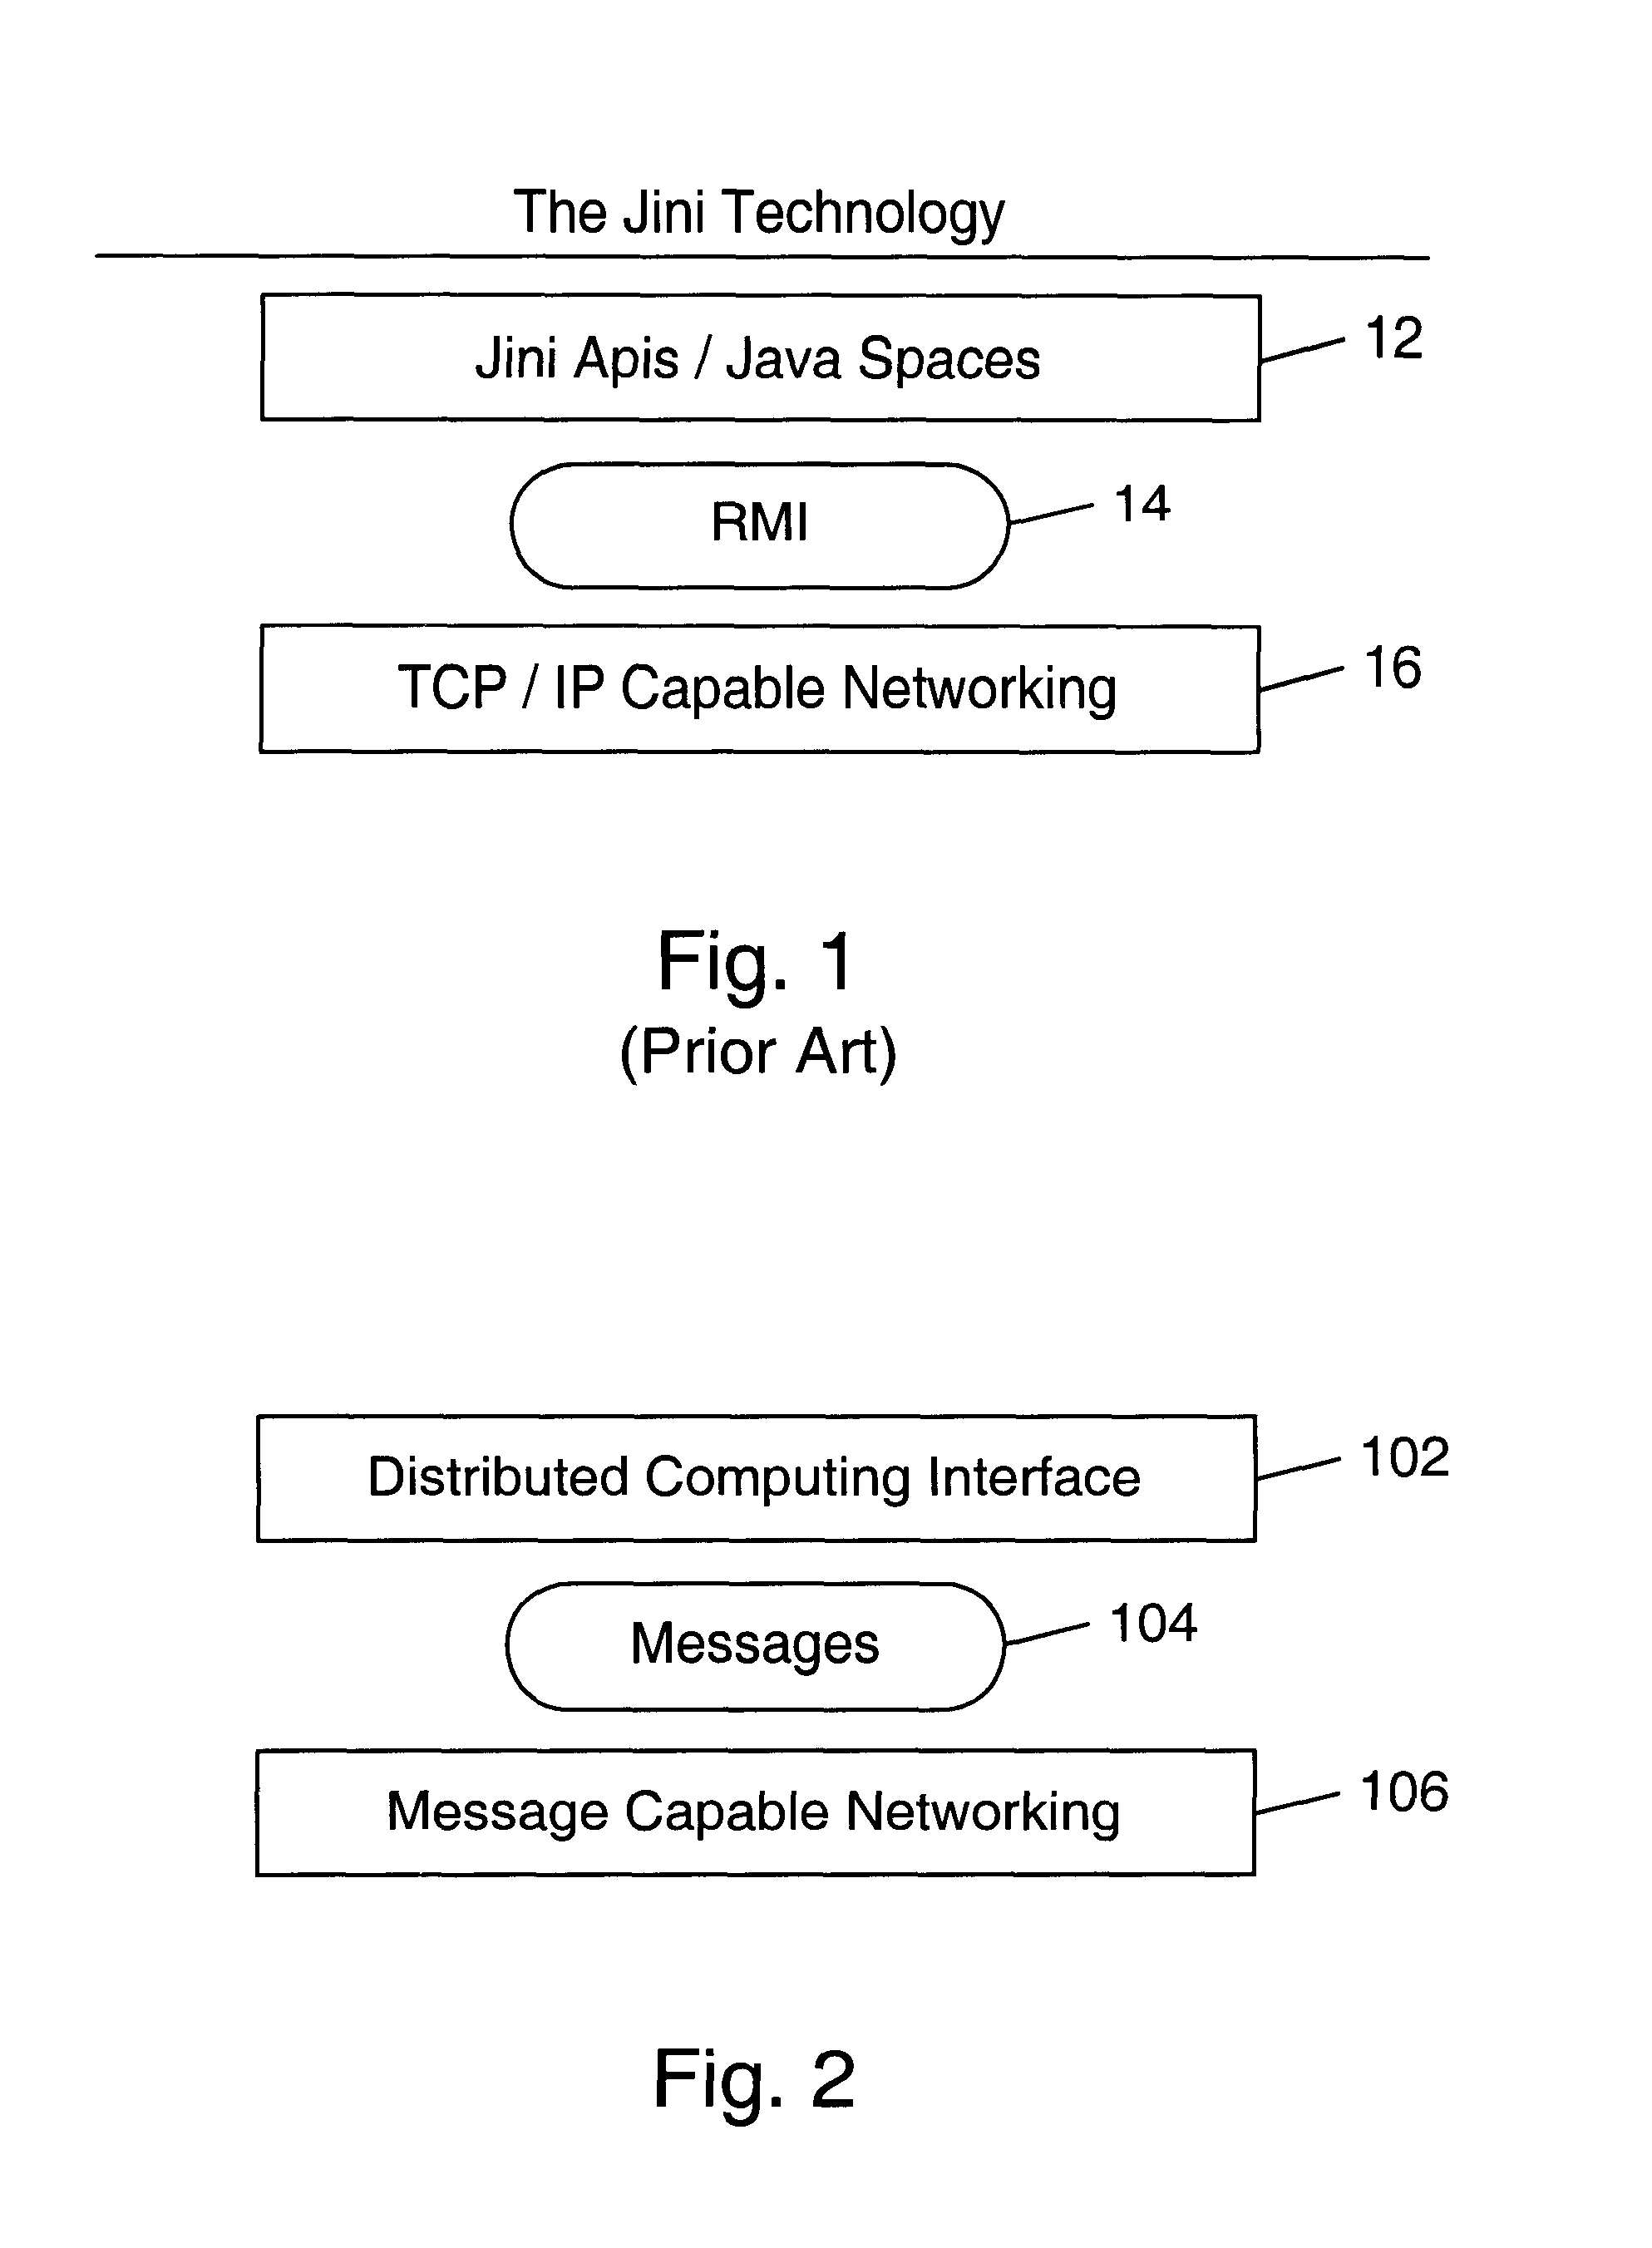 Message gates in a distributed computing environment